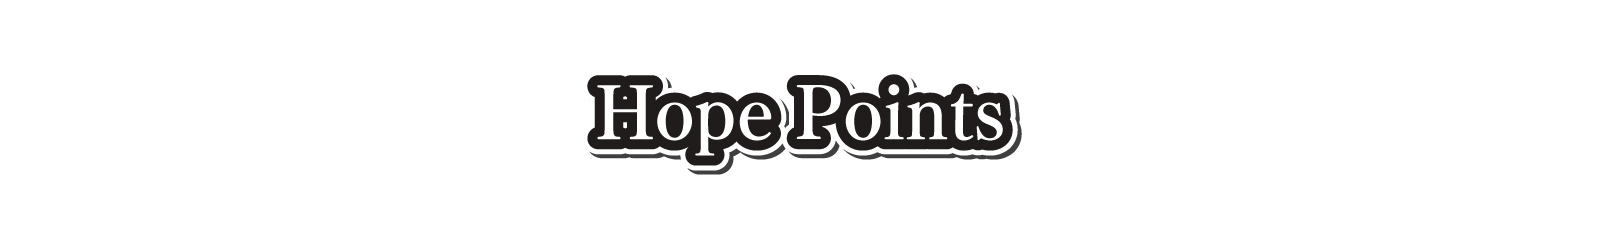 Hope Points